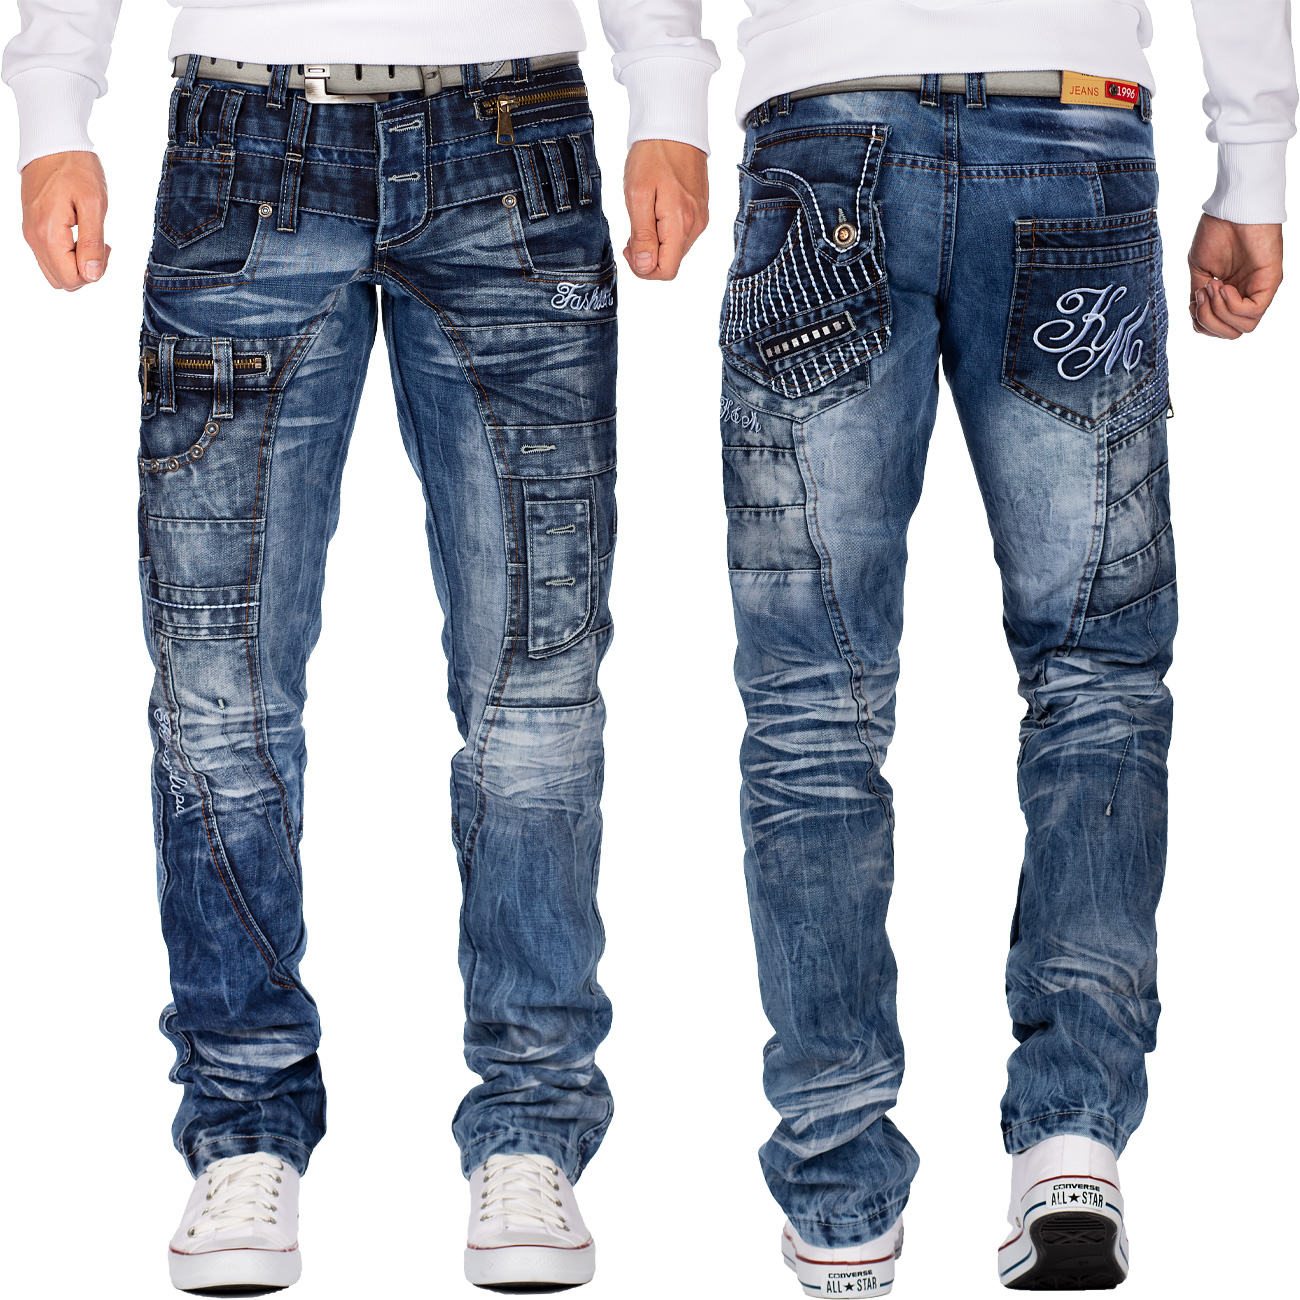 Kosmo Lupo Mens Jeans Cargo Star Trousers Denim Dope Swag Zipper ...